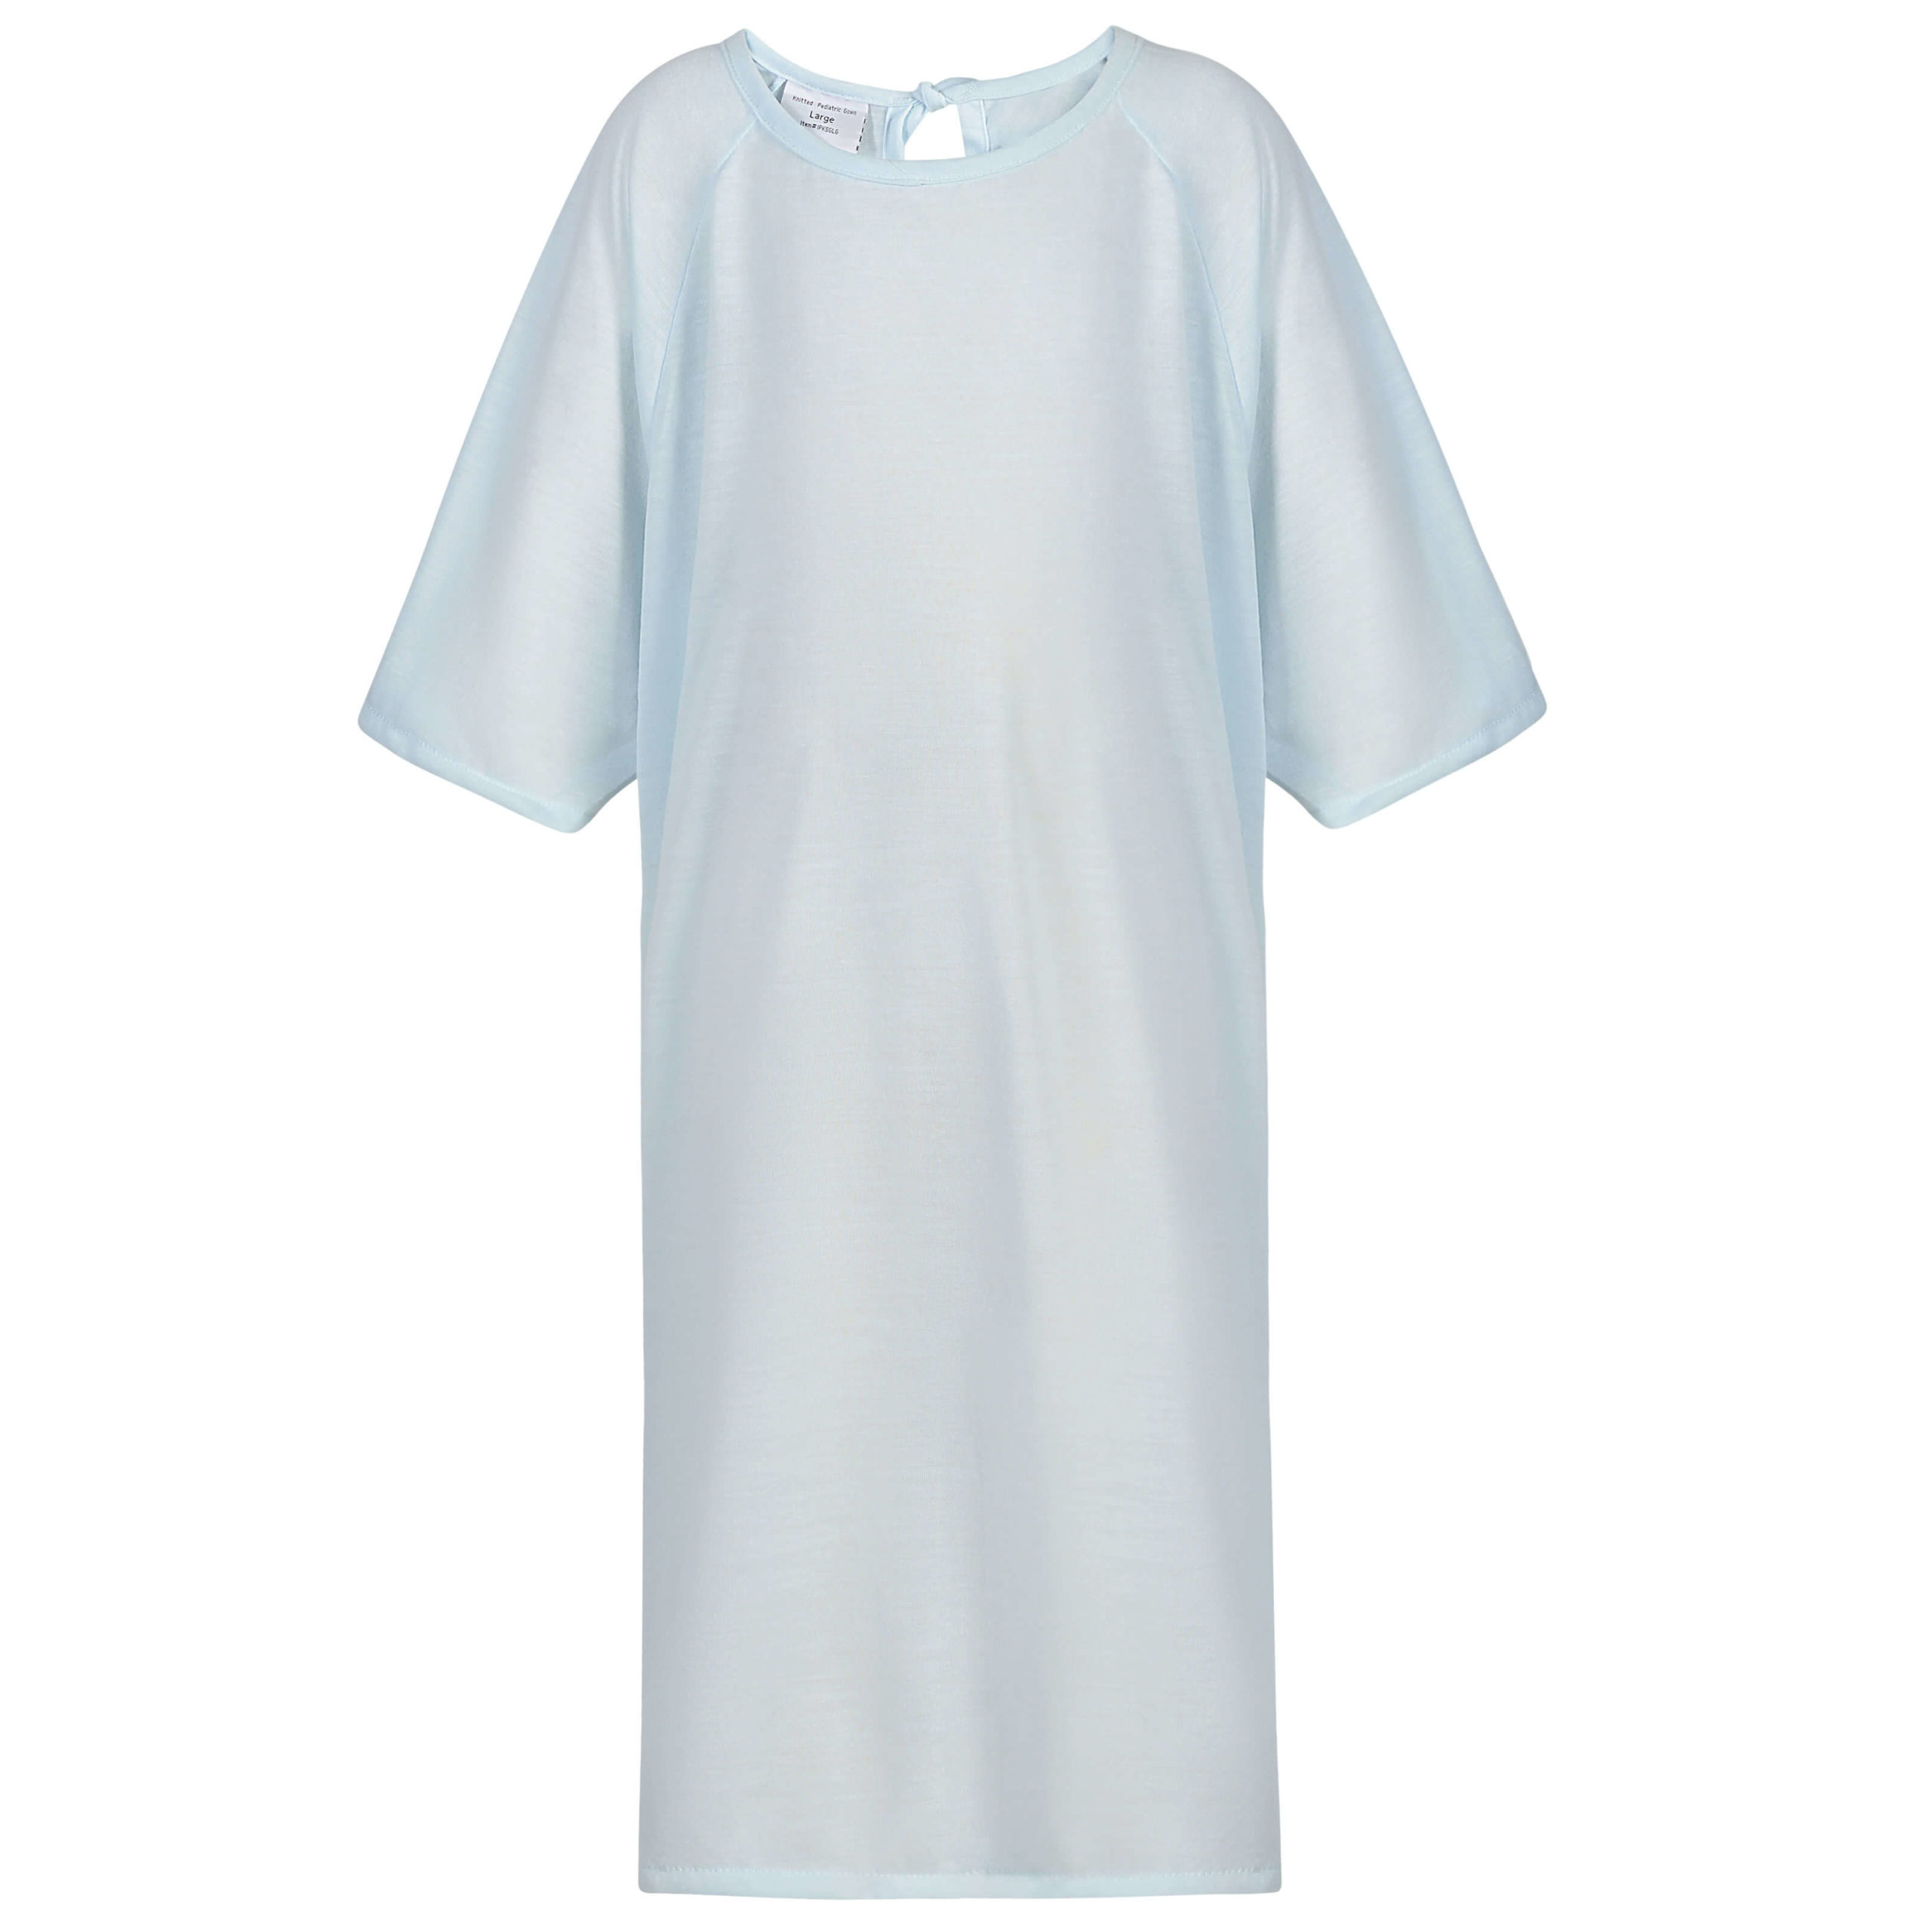 ReliaFit™ Knitted Pediatric Gowns